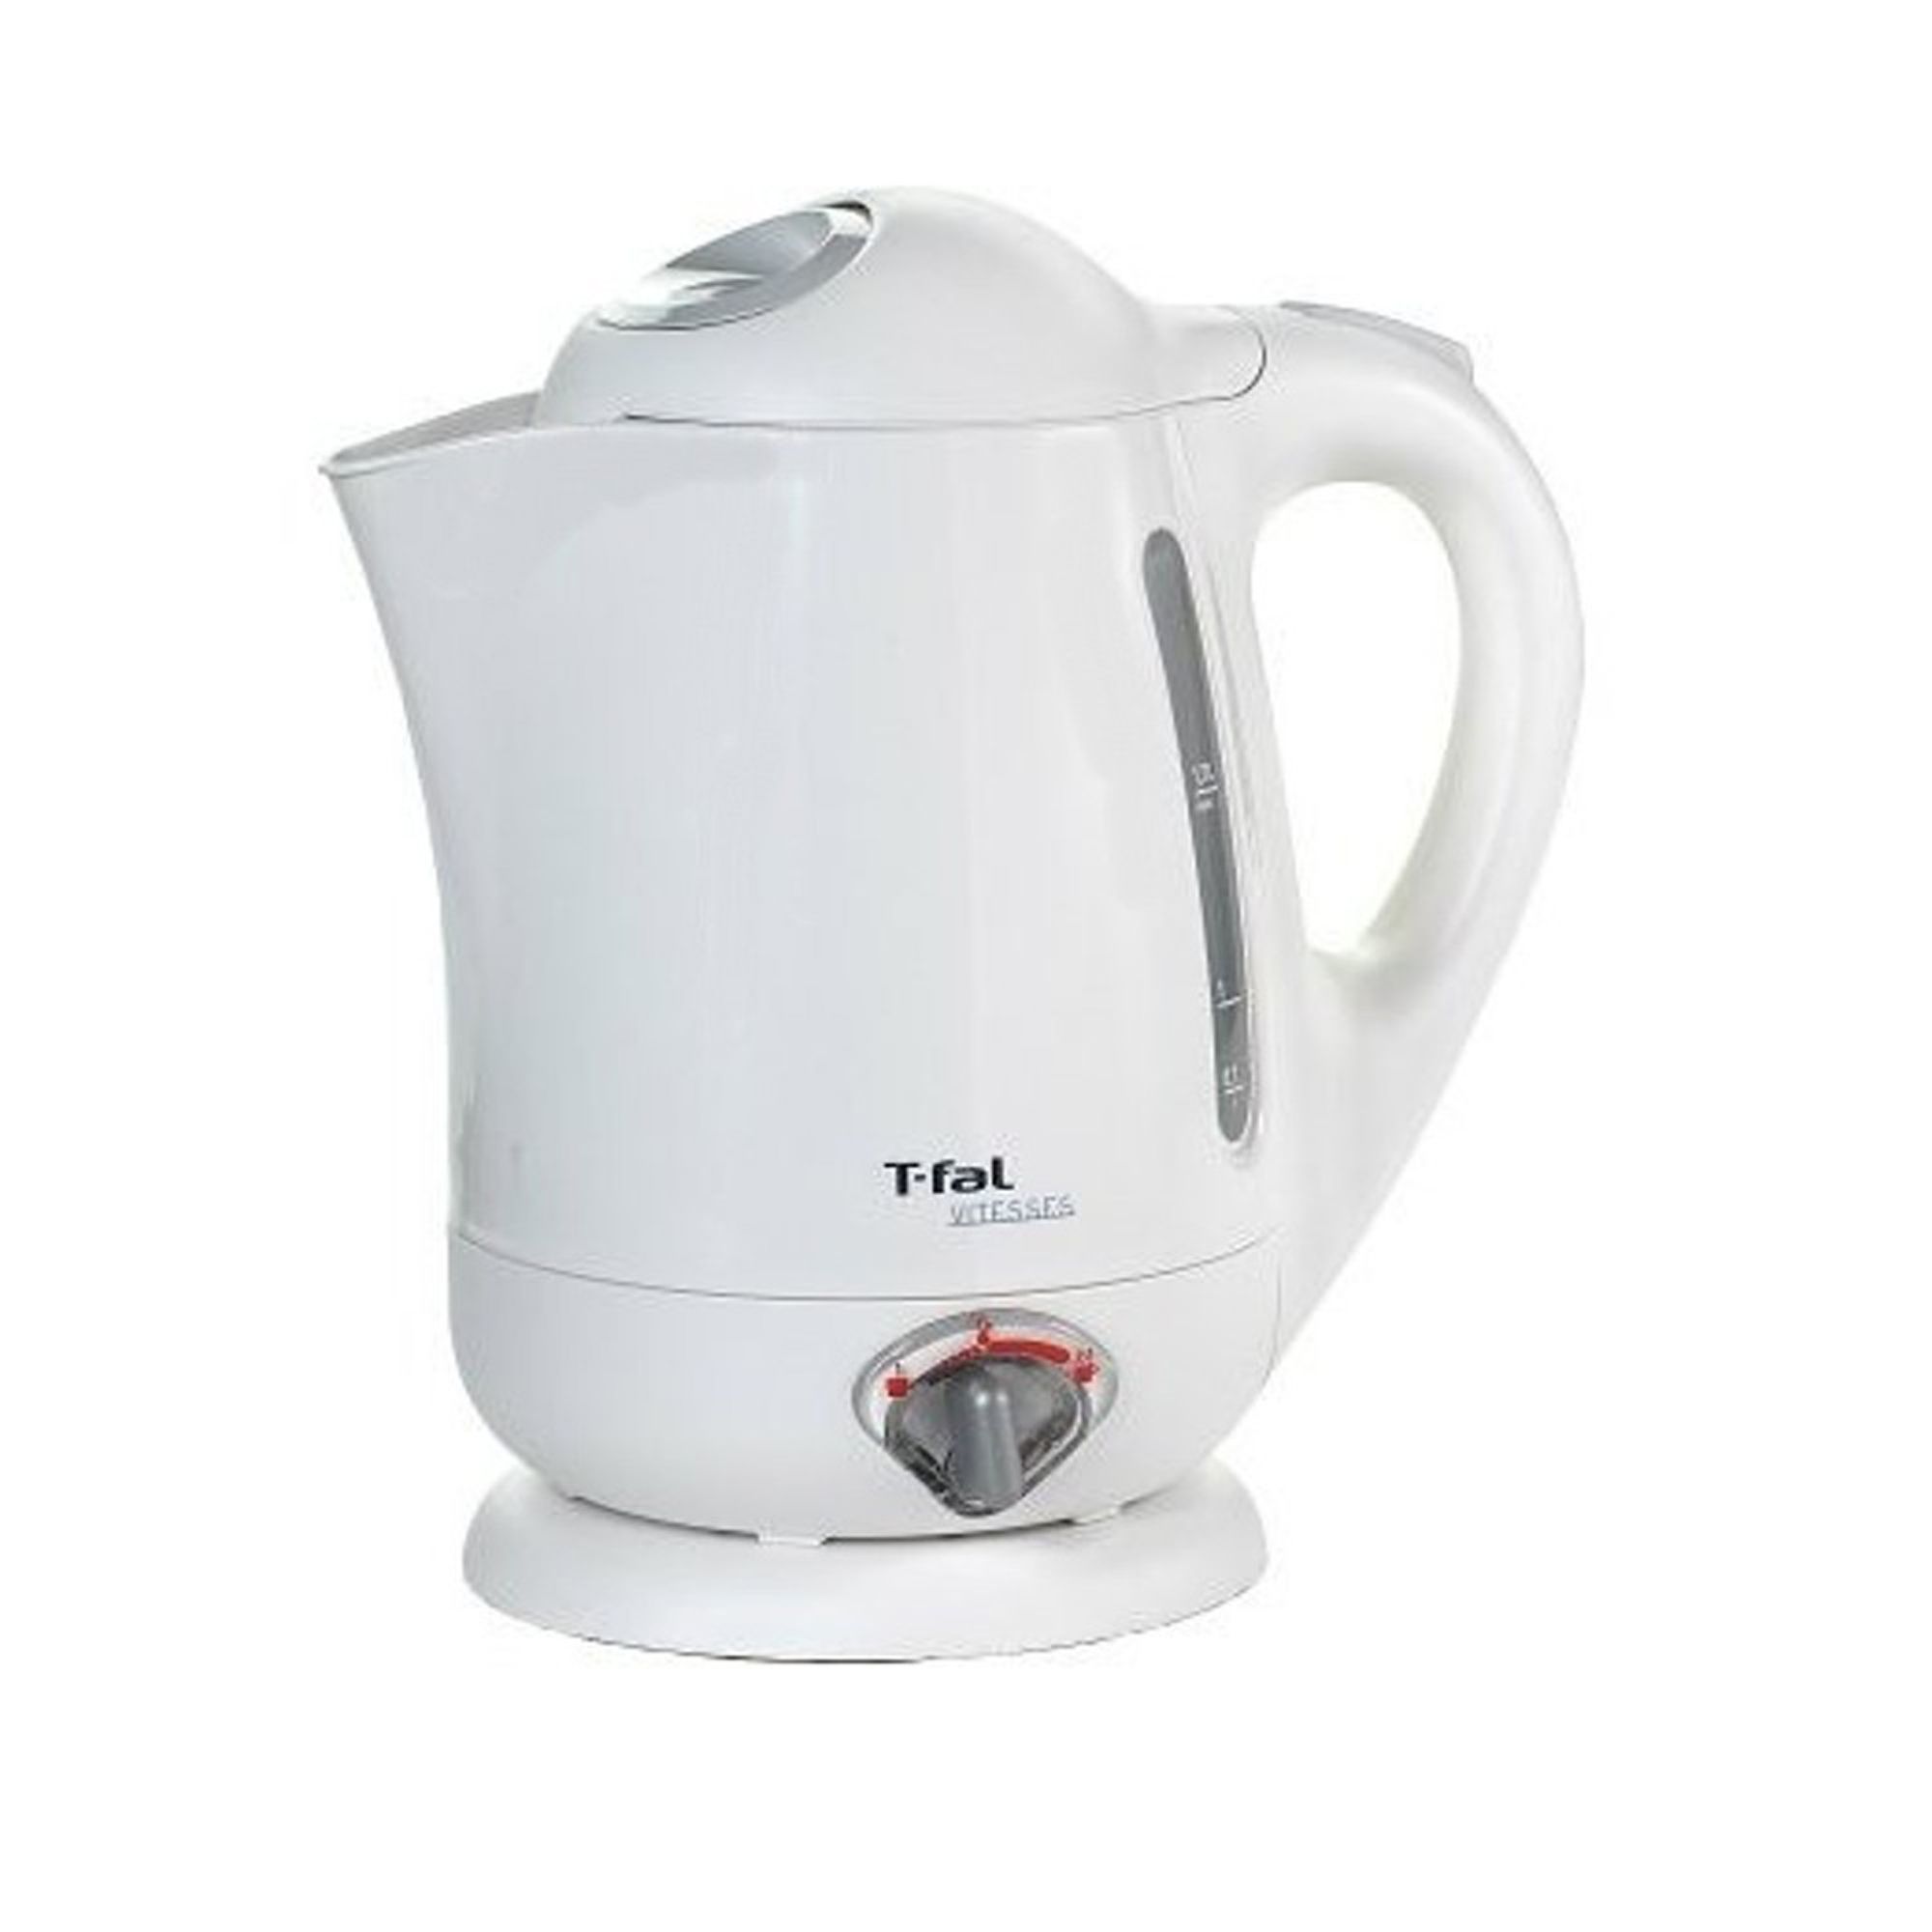 T-fal BF6520003 Vitesse 7-Cup Electric Kettle